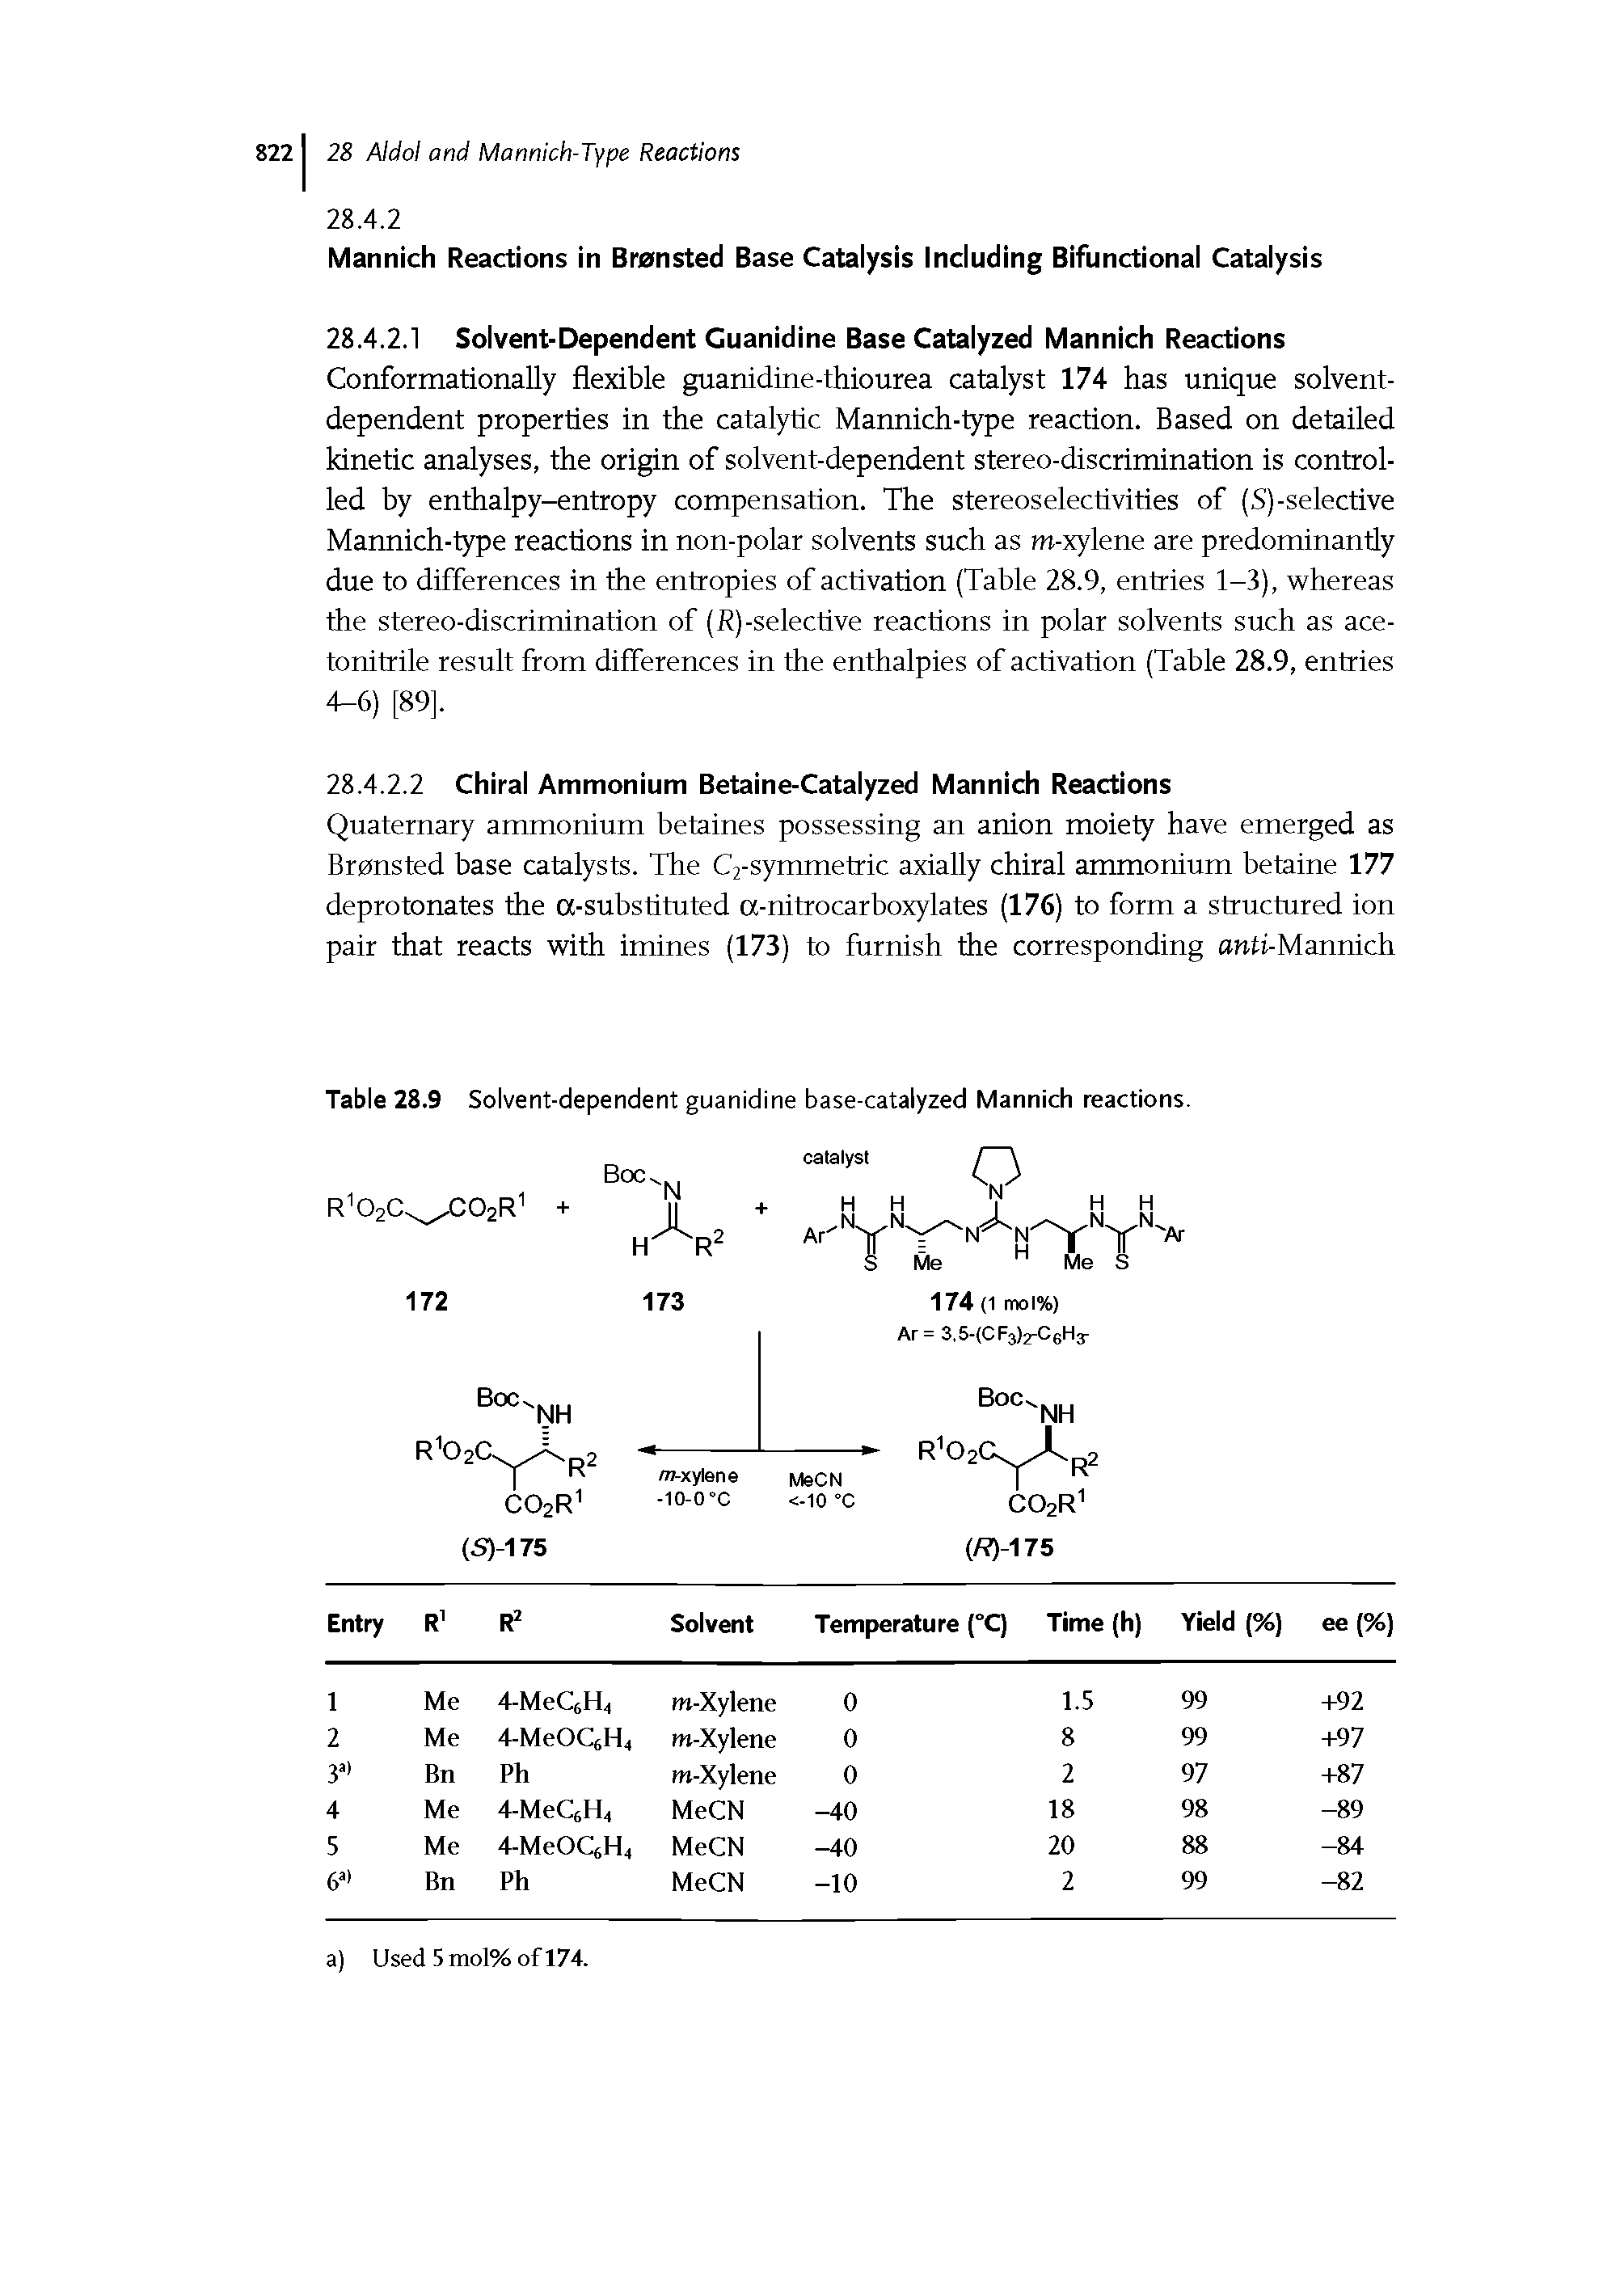 Table 28.9 Solvent-dependent guanidine base-catalyzed Mannich reactions.